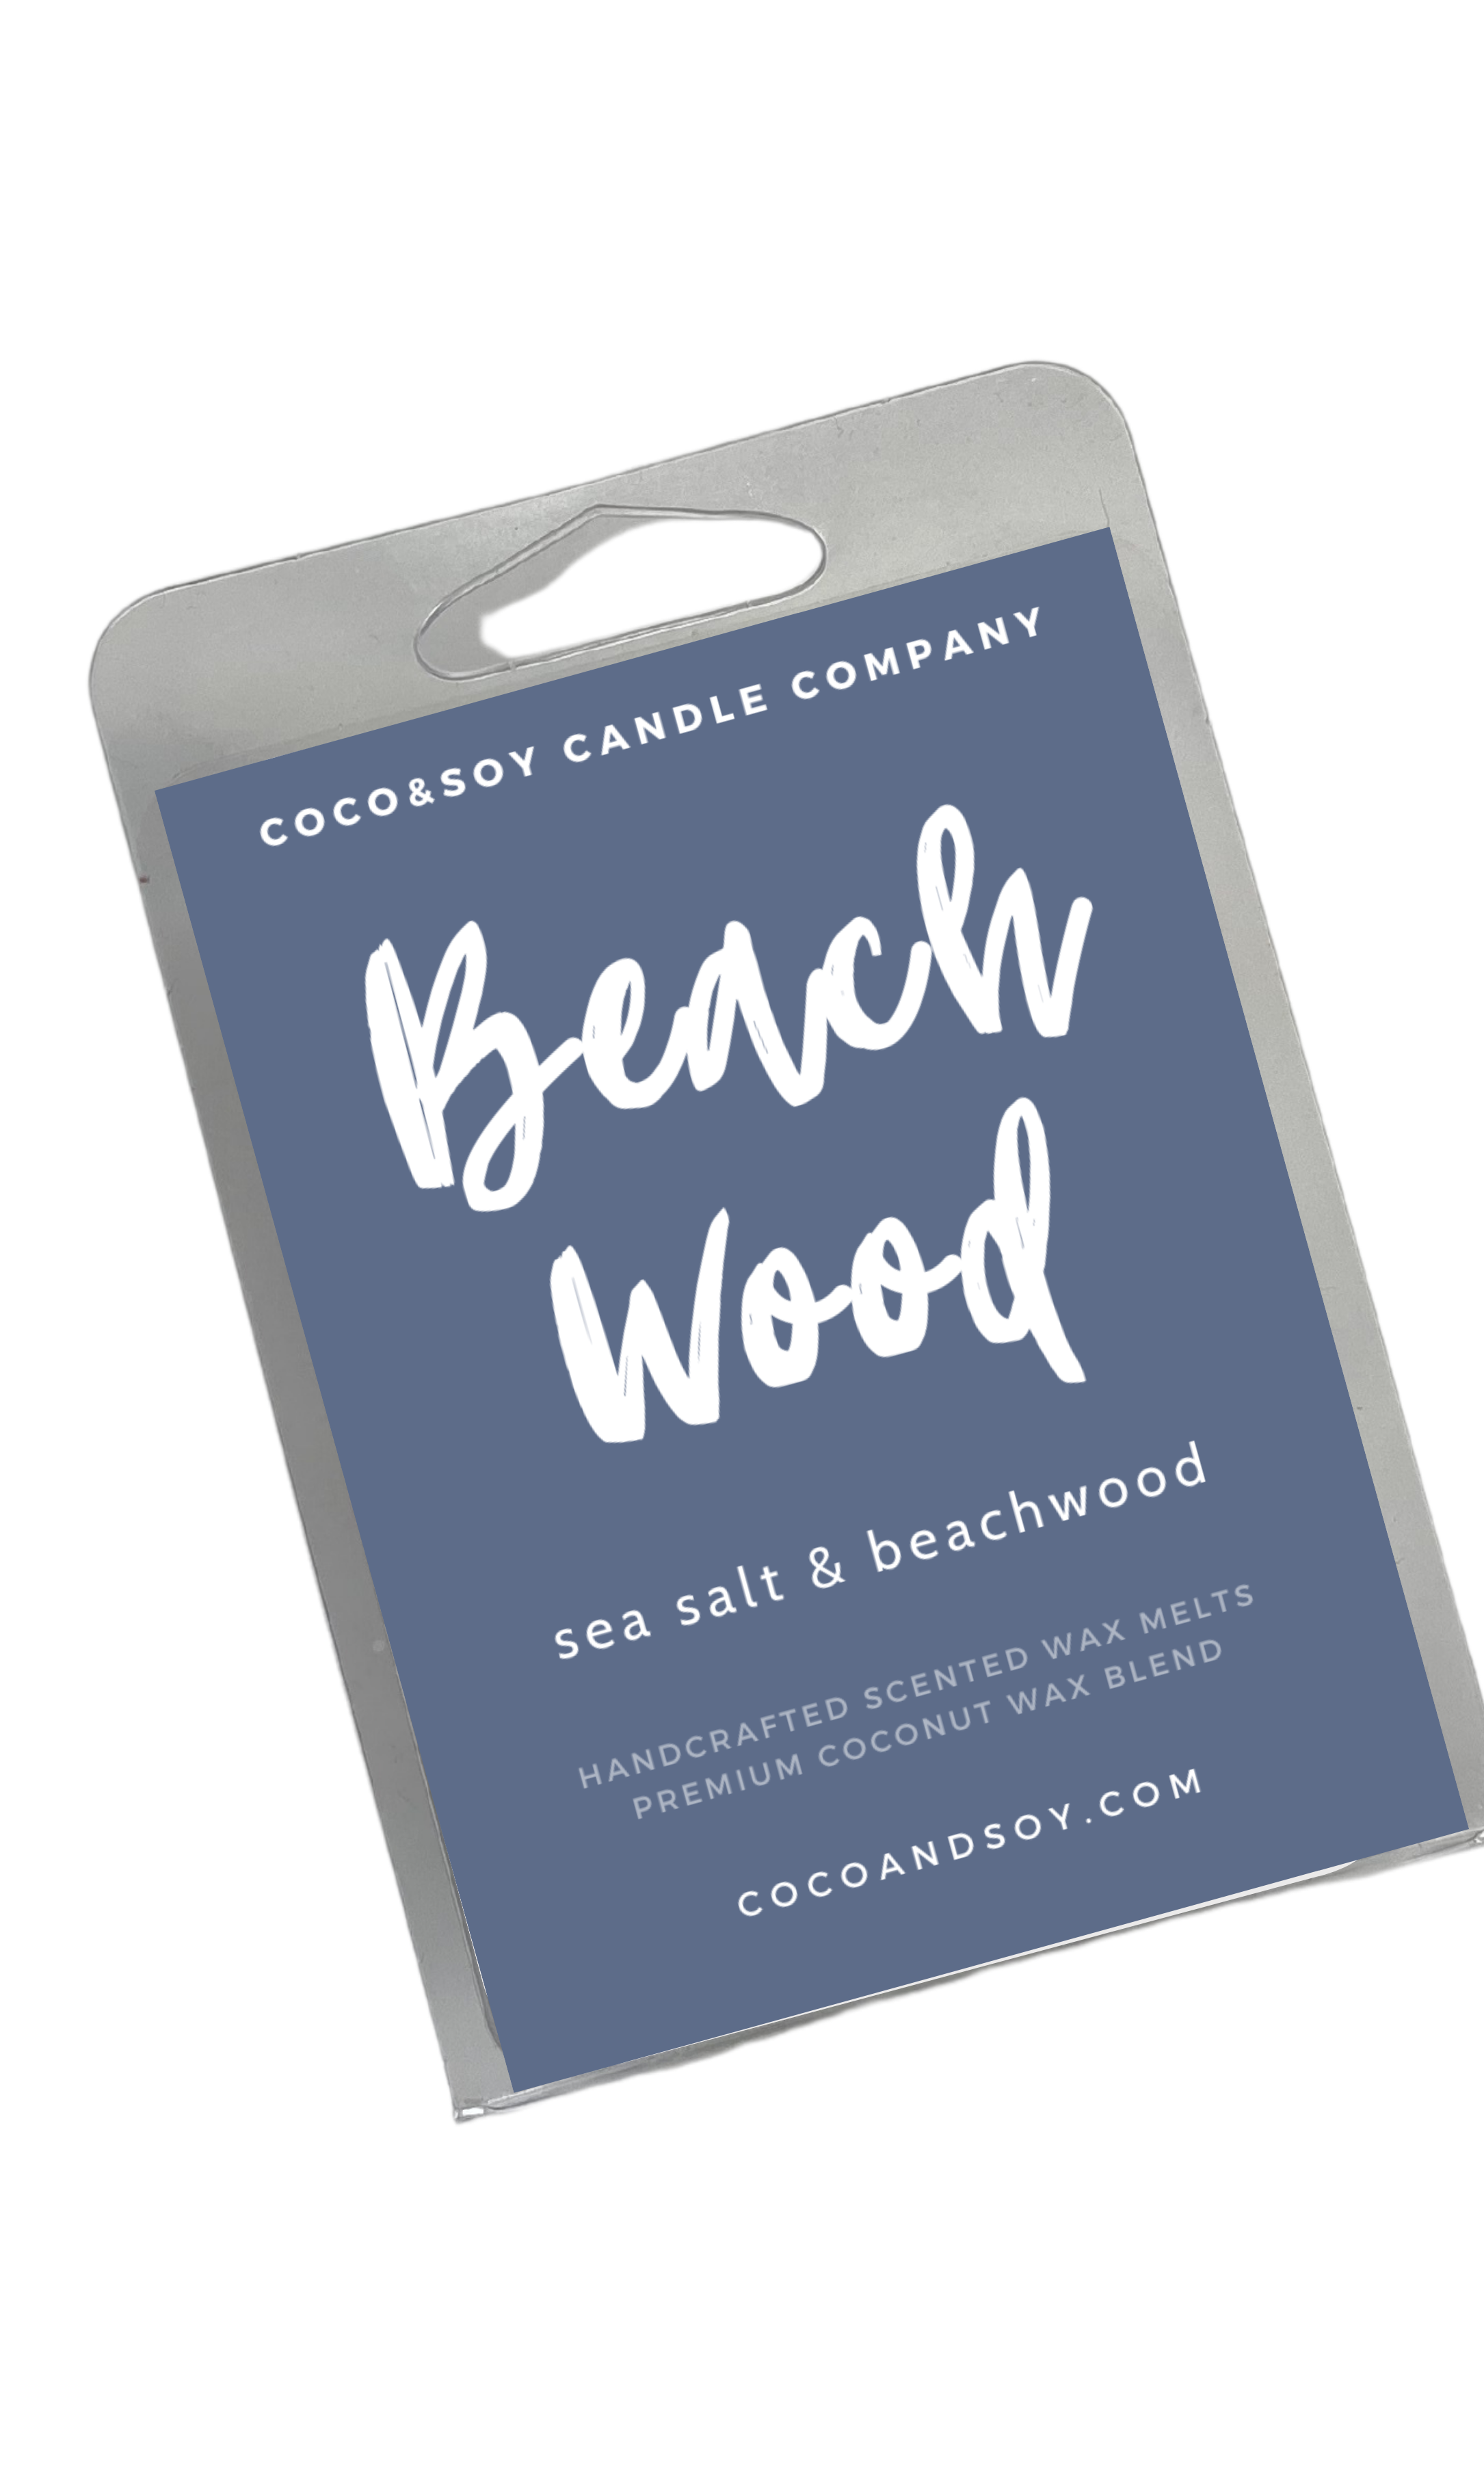 Beach Wood Candles + Wax Melts CocoandSoy Candle Company